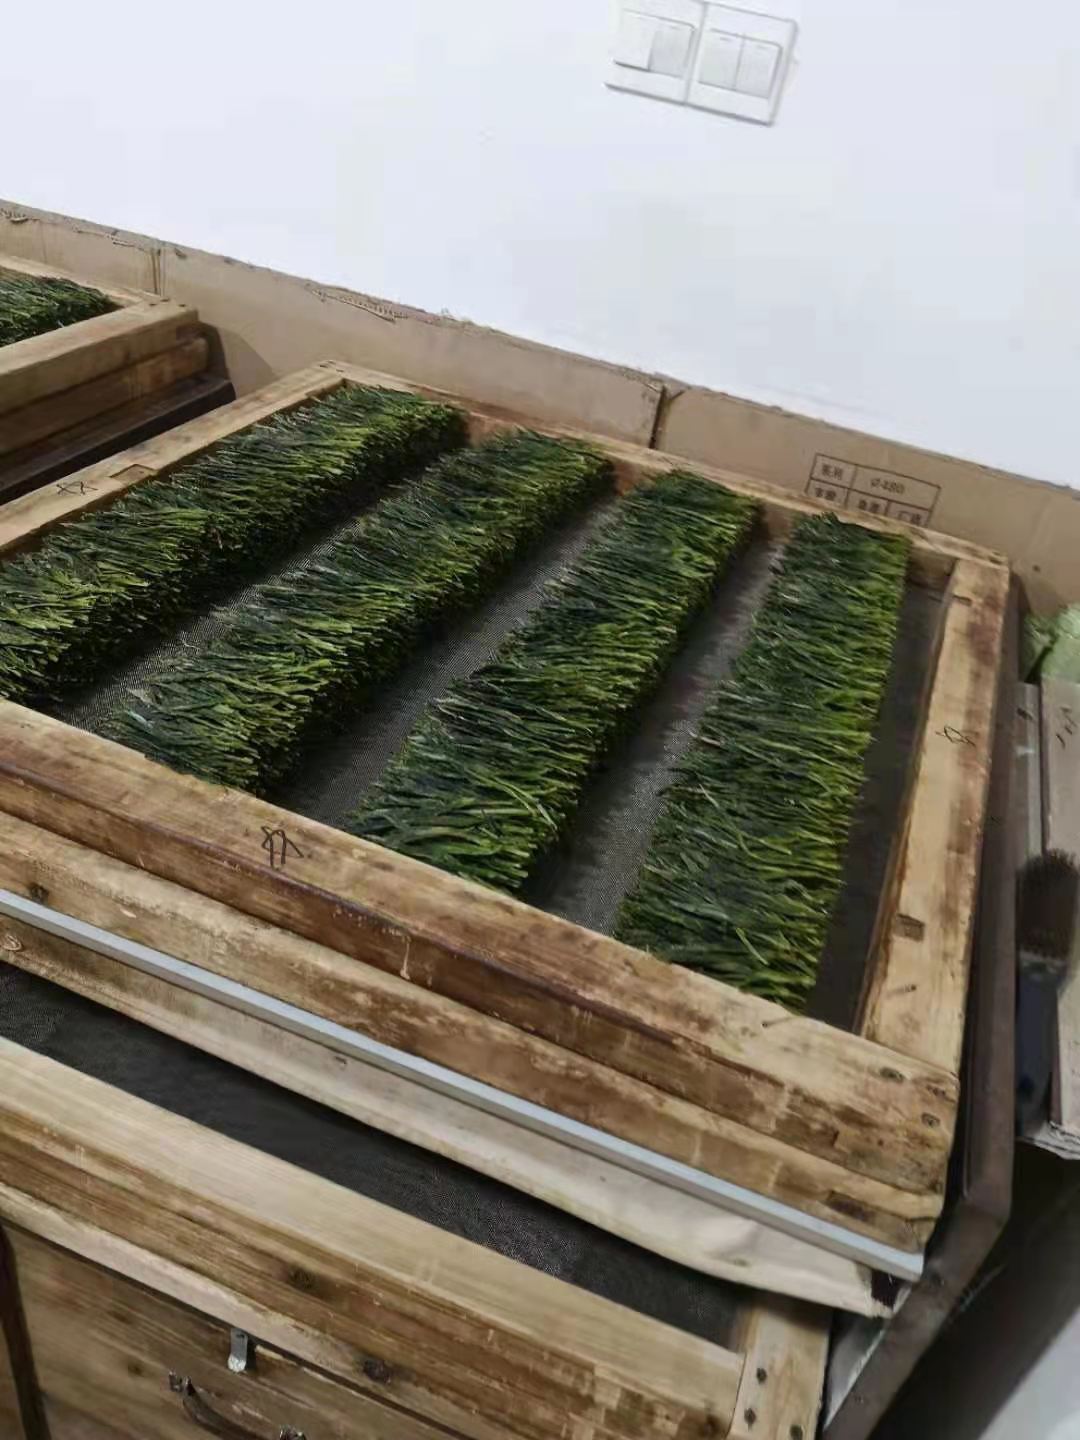 Four rows of finished Taiping Houkui leaves stacked on one of the pressing frames.